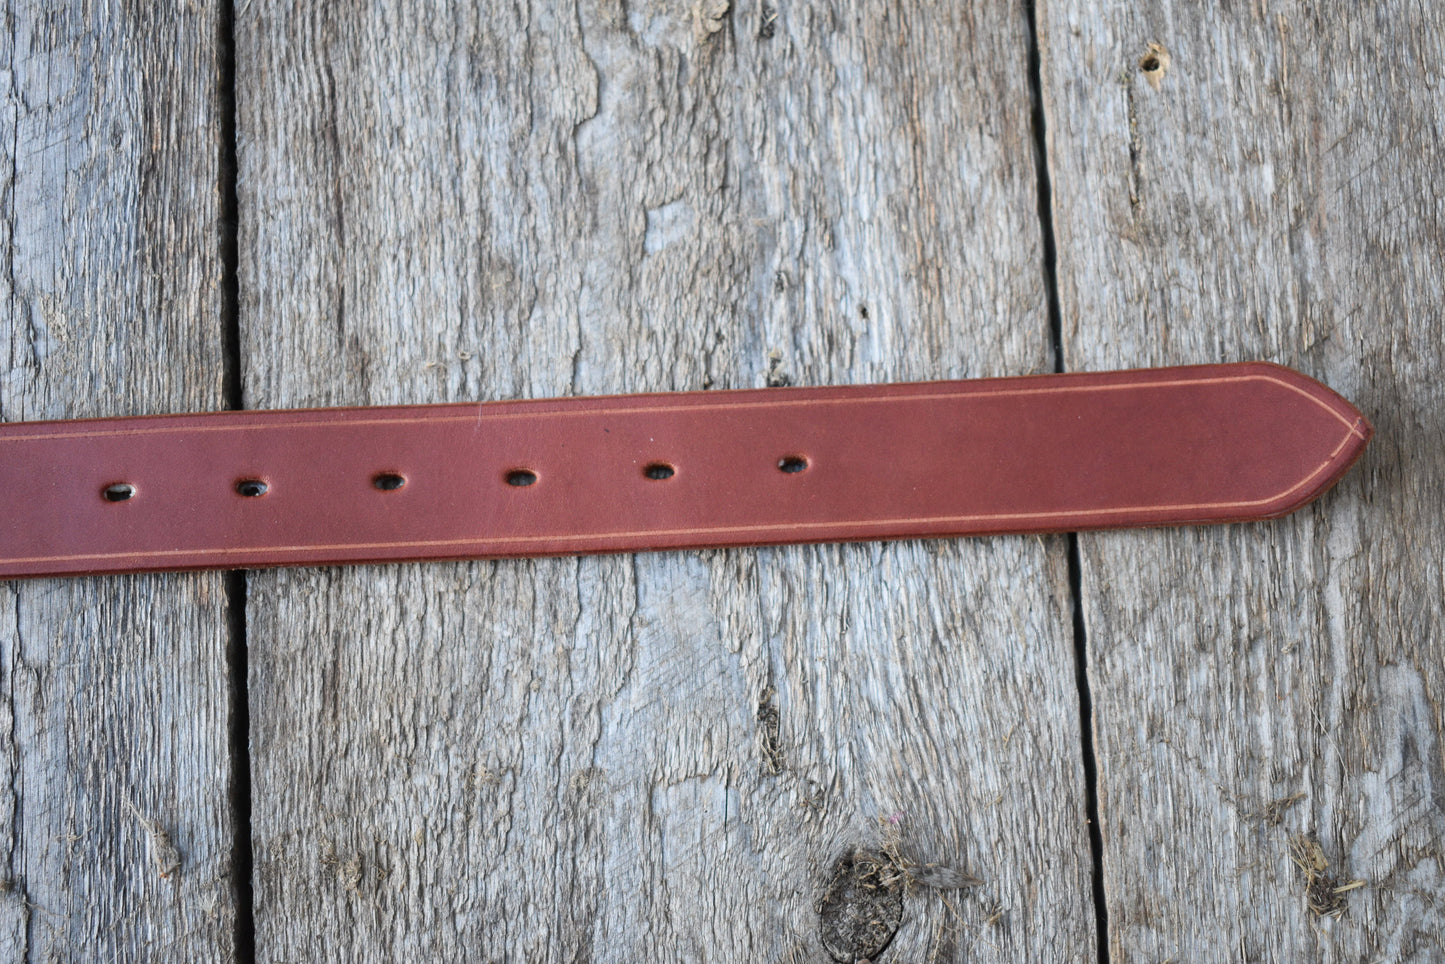 Mens Leather BELT, Full Grain Leather Belt, Leather Waist Belt, 1.5 inches with your choice of buckle, chestnut